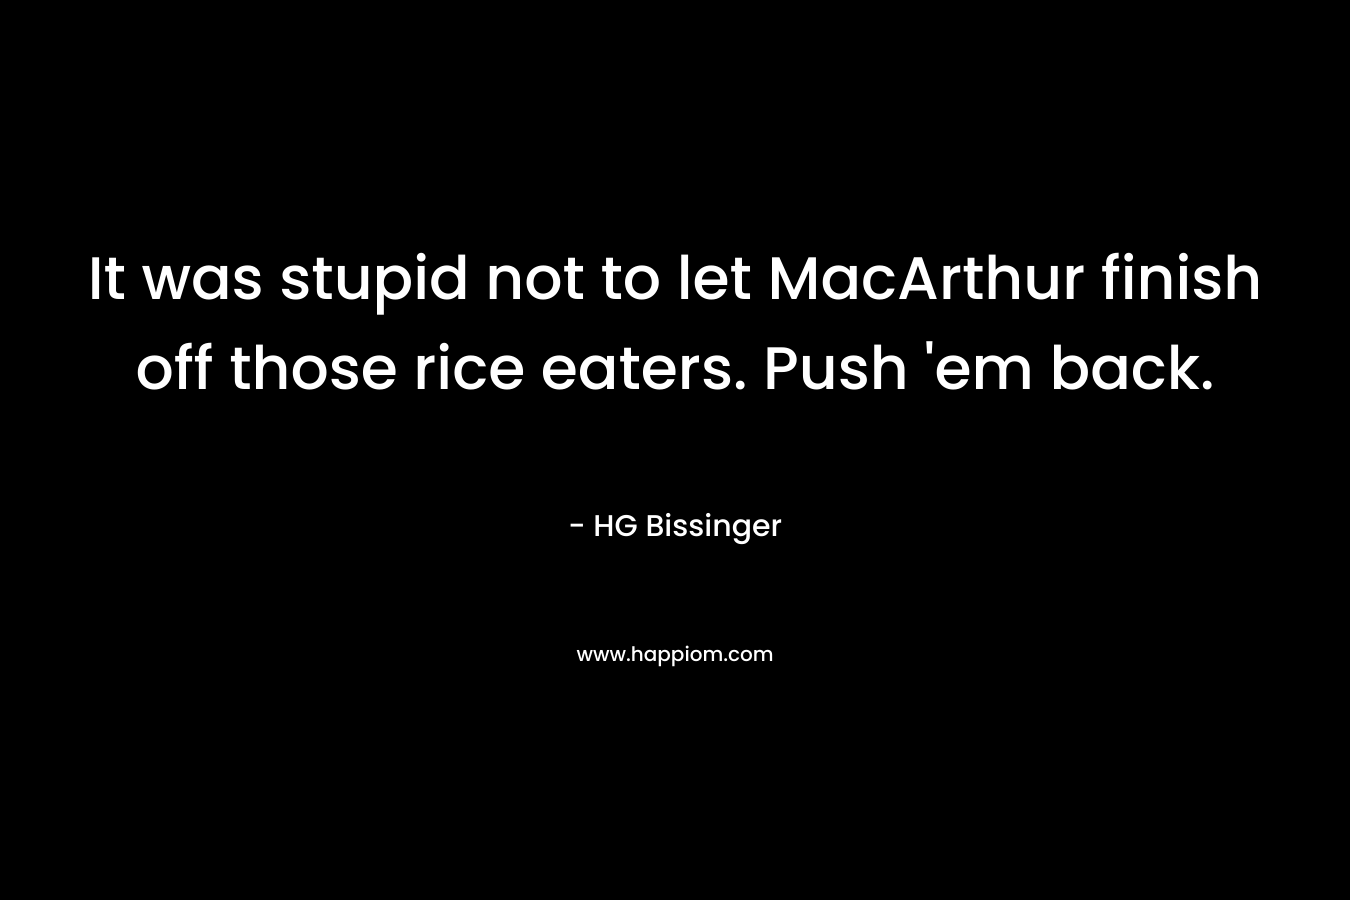 It was stupid not to let MacArthur finish off those rice eaters. Push ’em back. – HG Bissinger